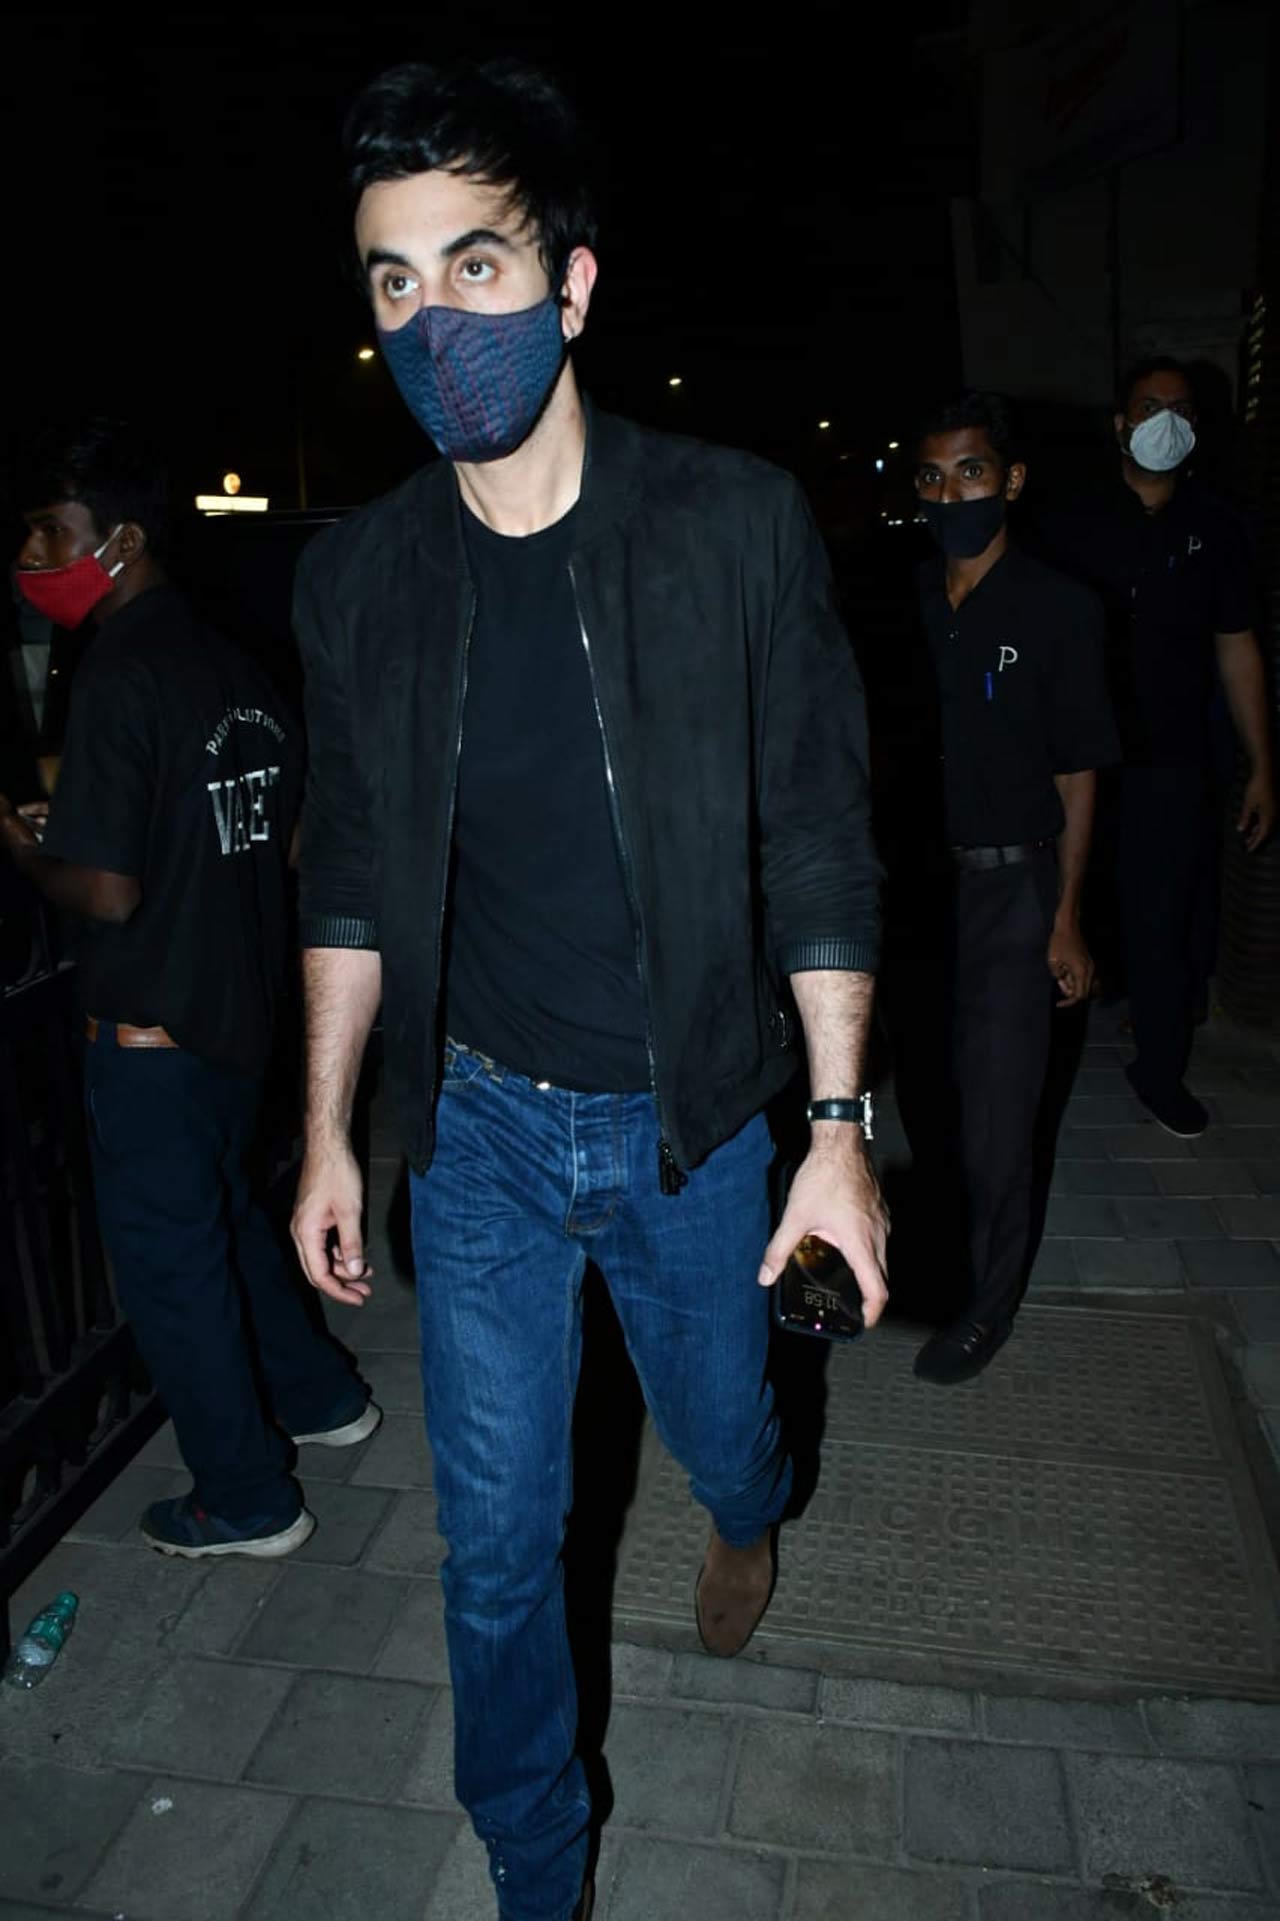 Ranbir Kapoor was also snapped at her casual best for the outing. The actor, who will be next seen in 'Brahmastra' opposite Alia Bhatt, opted for a basic black tee, a black shirt, and a pair of blue denim for the dinner party.